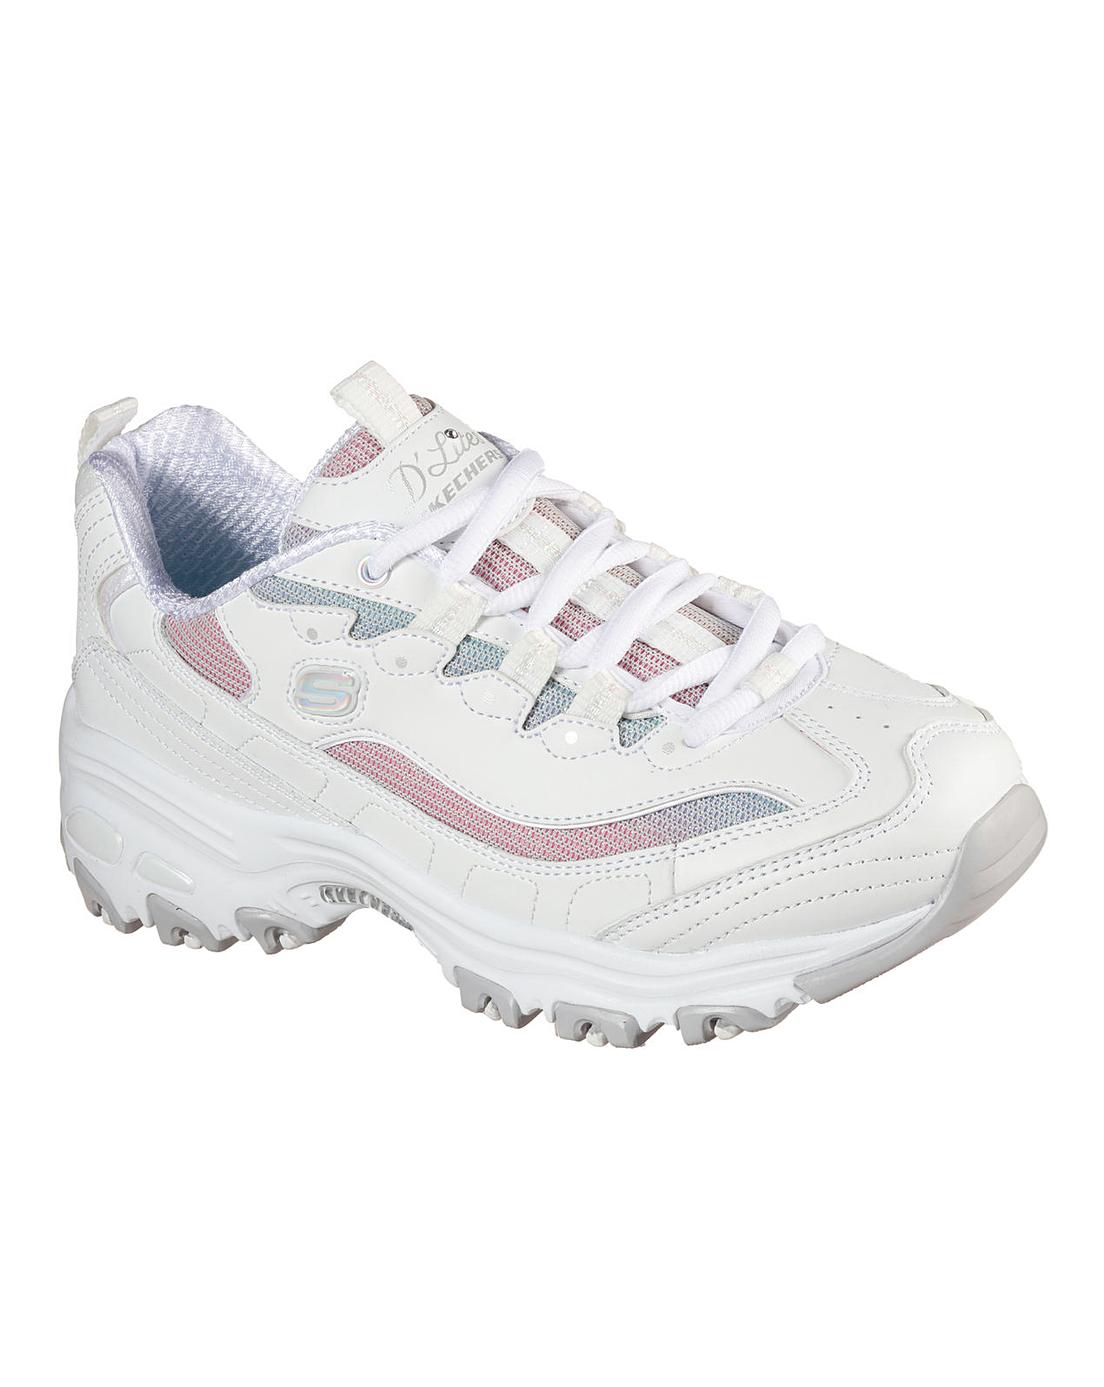 Skechers D'Lites Trainers | Simply Be